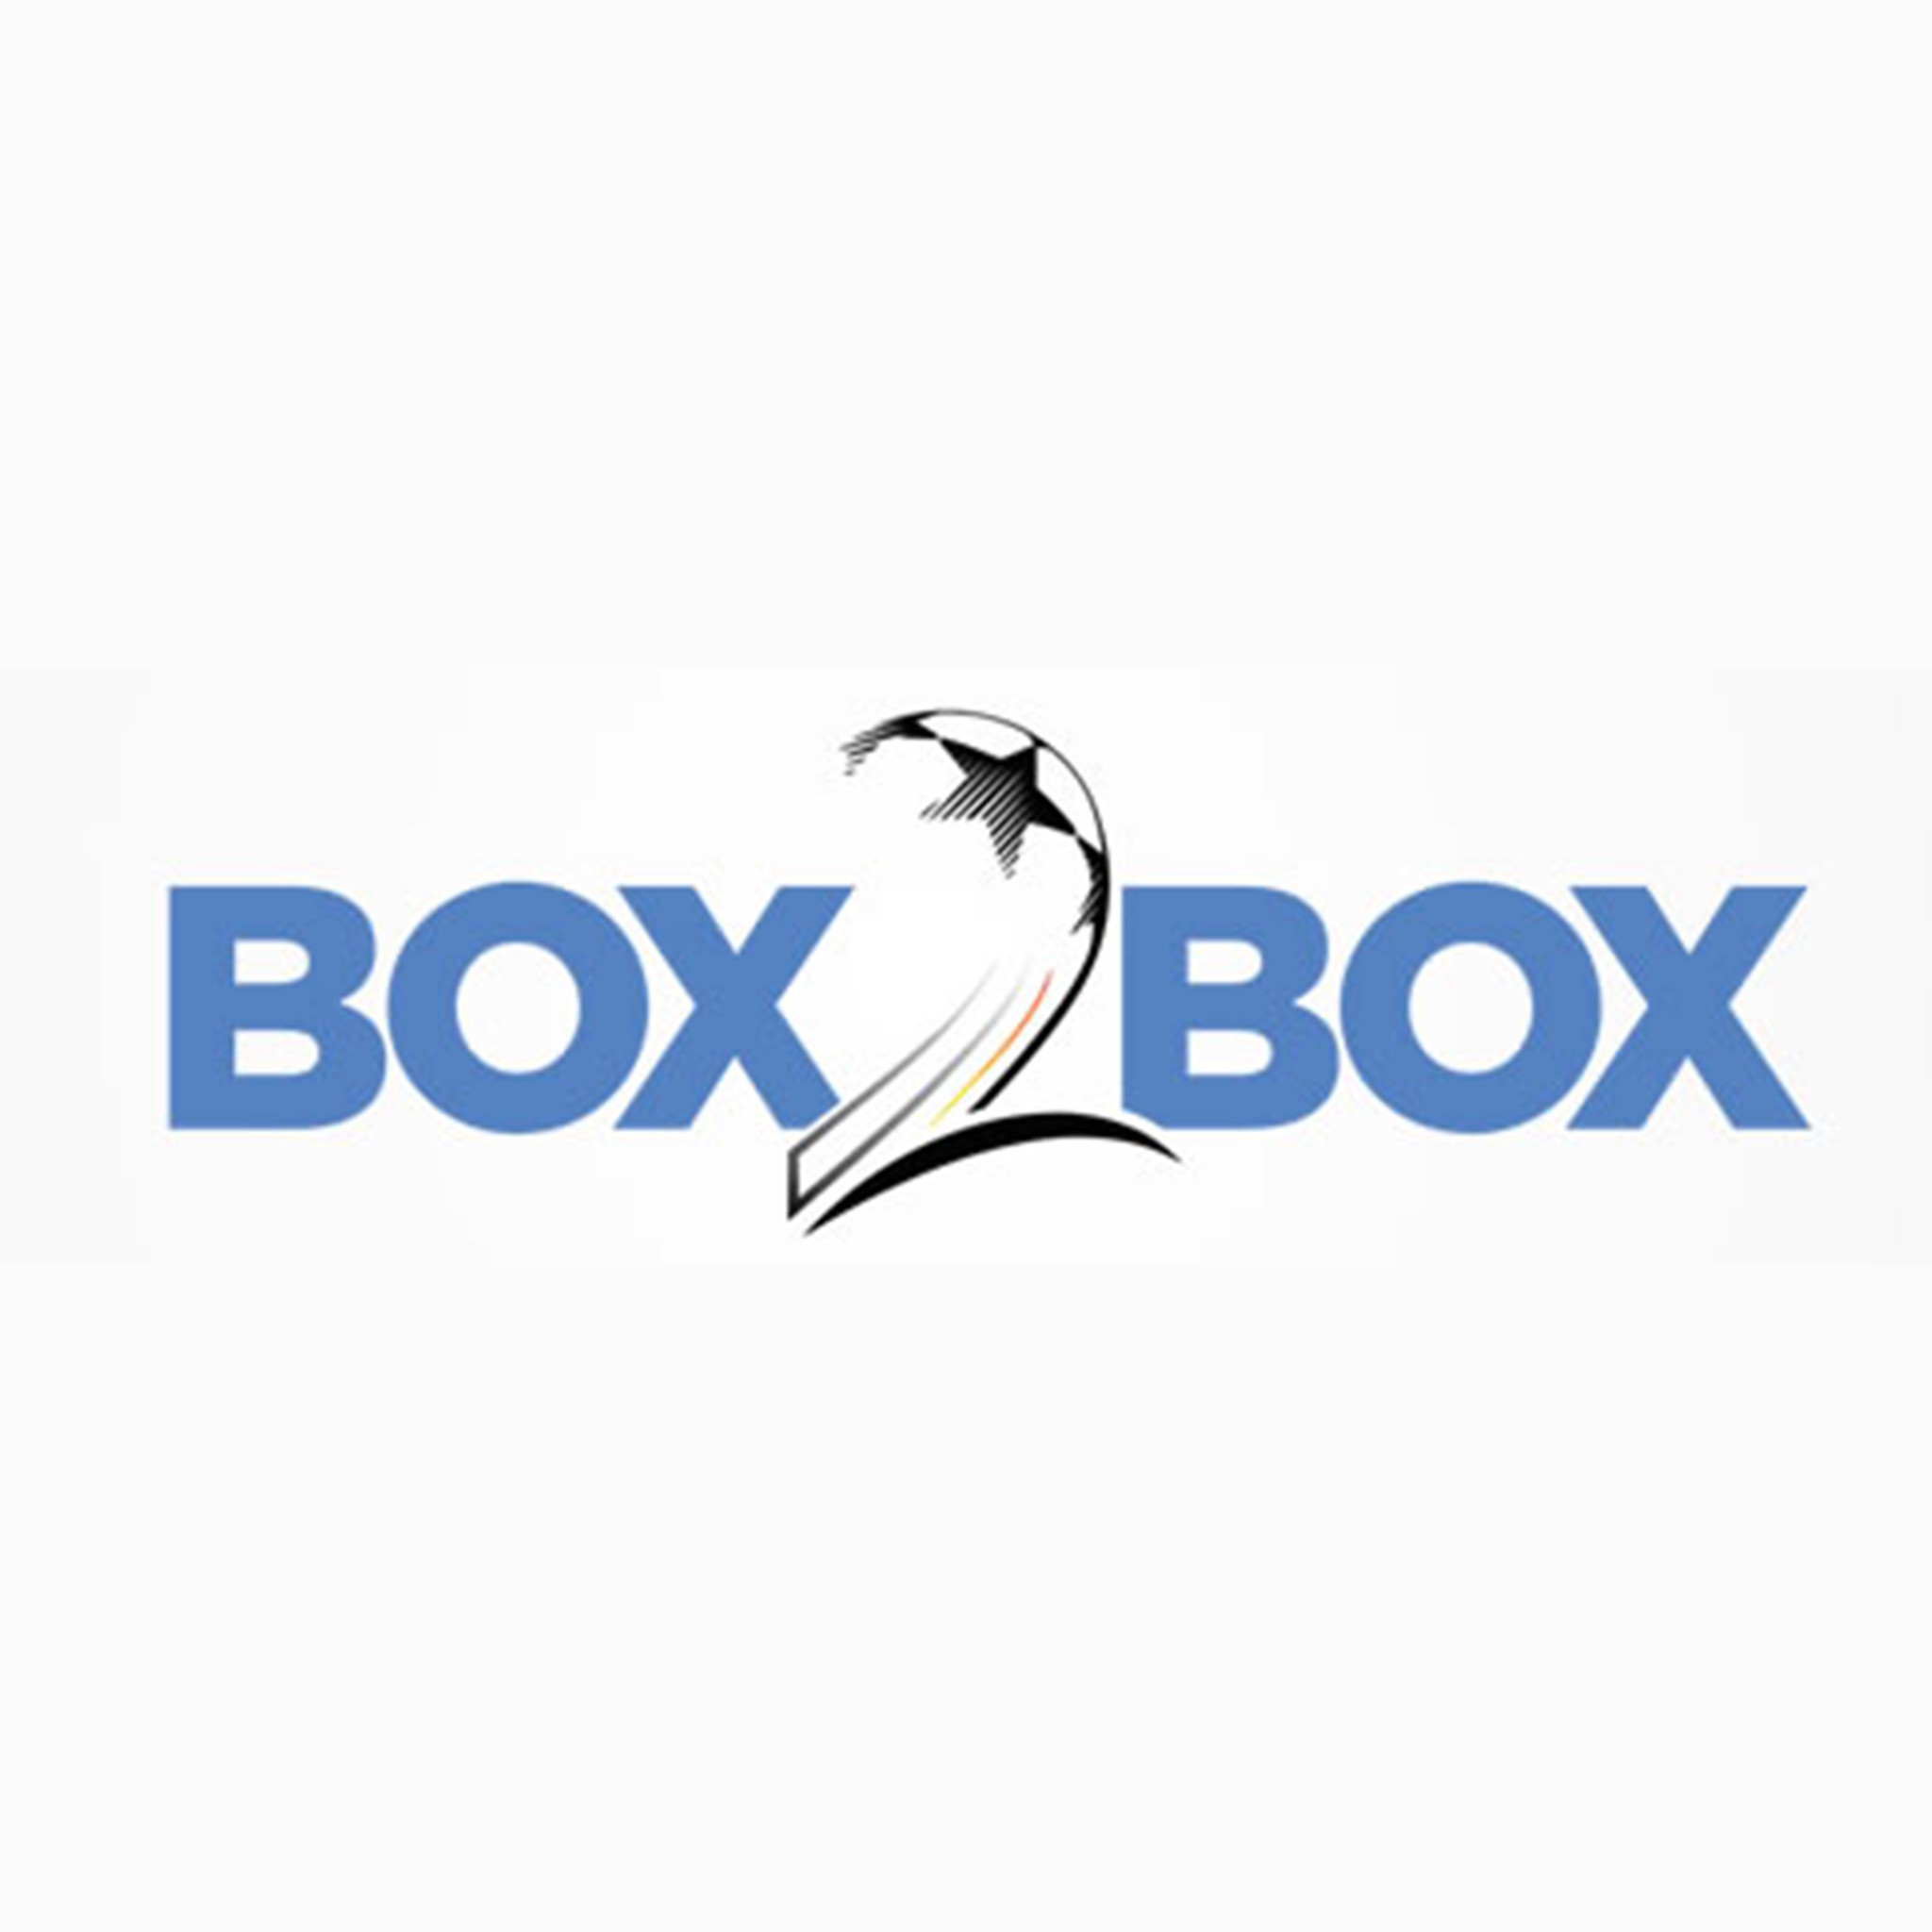 Box2Box - Joey Lynch on APL & Socceroos, Henry Winter unpacks Everton & Forest charges